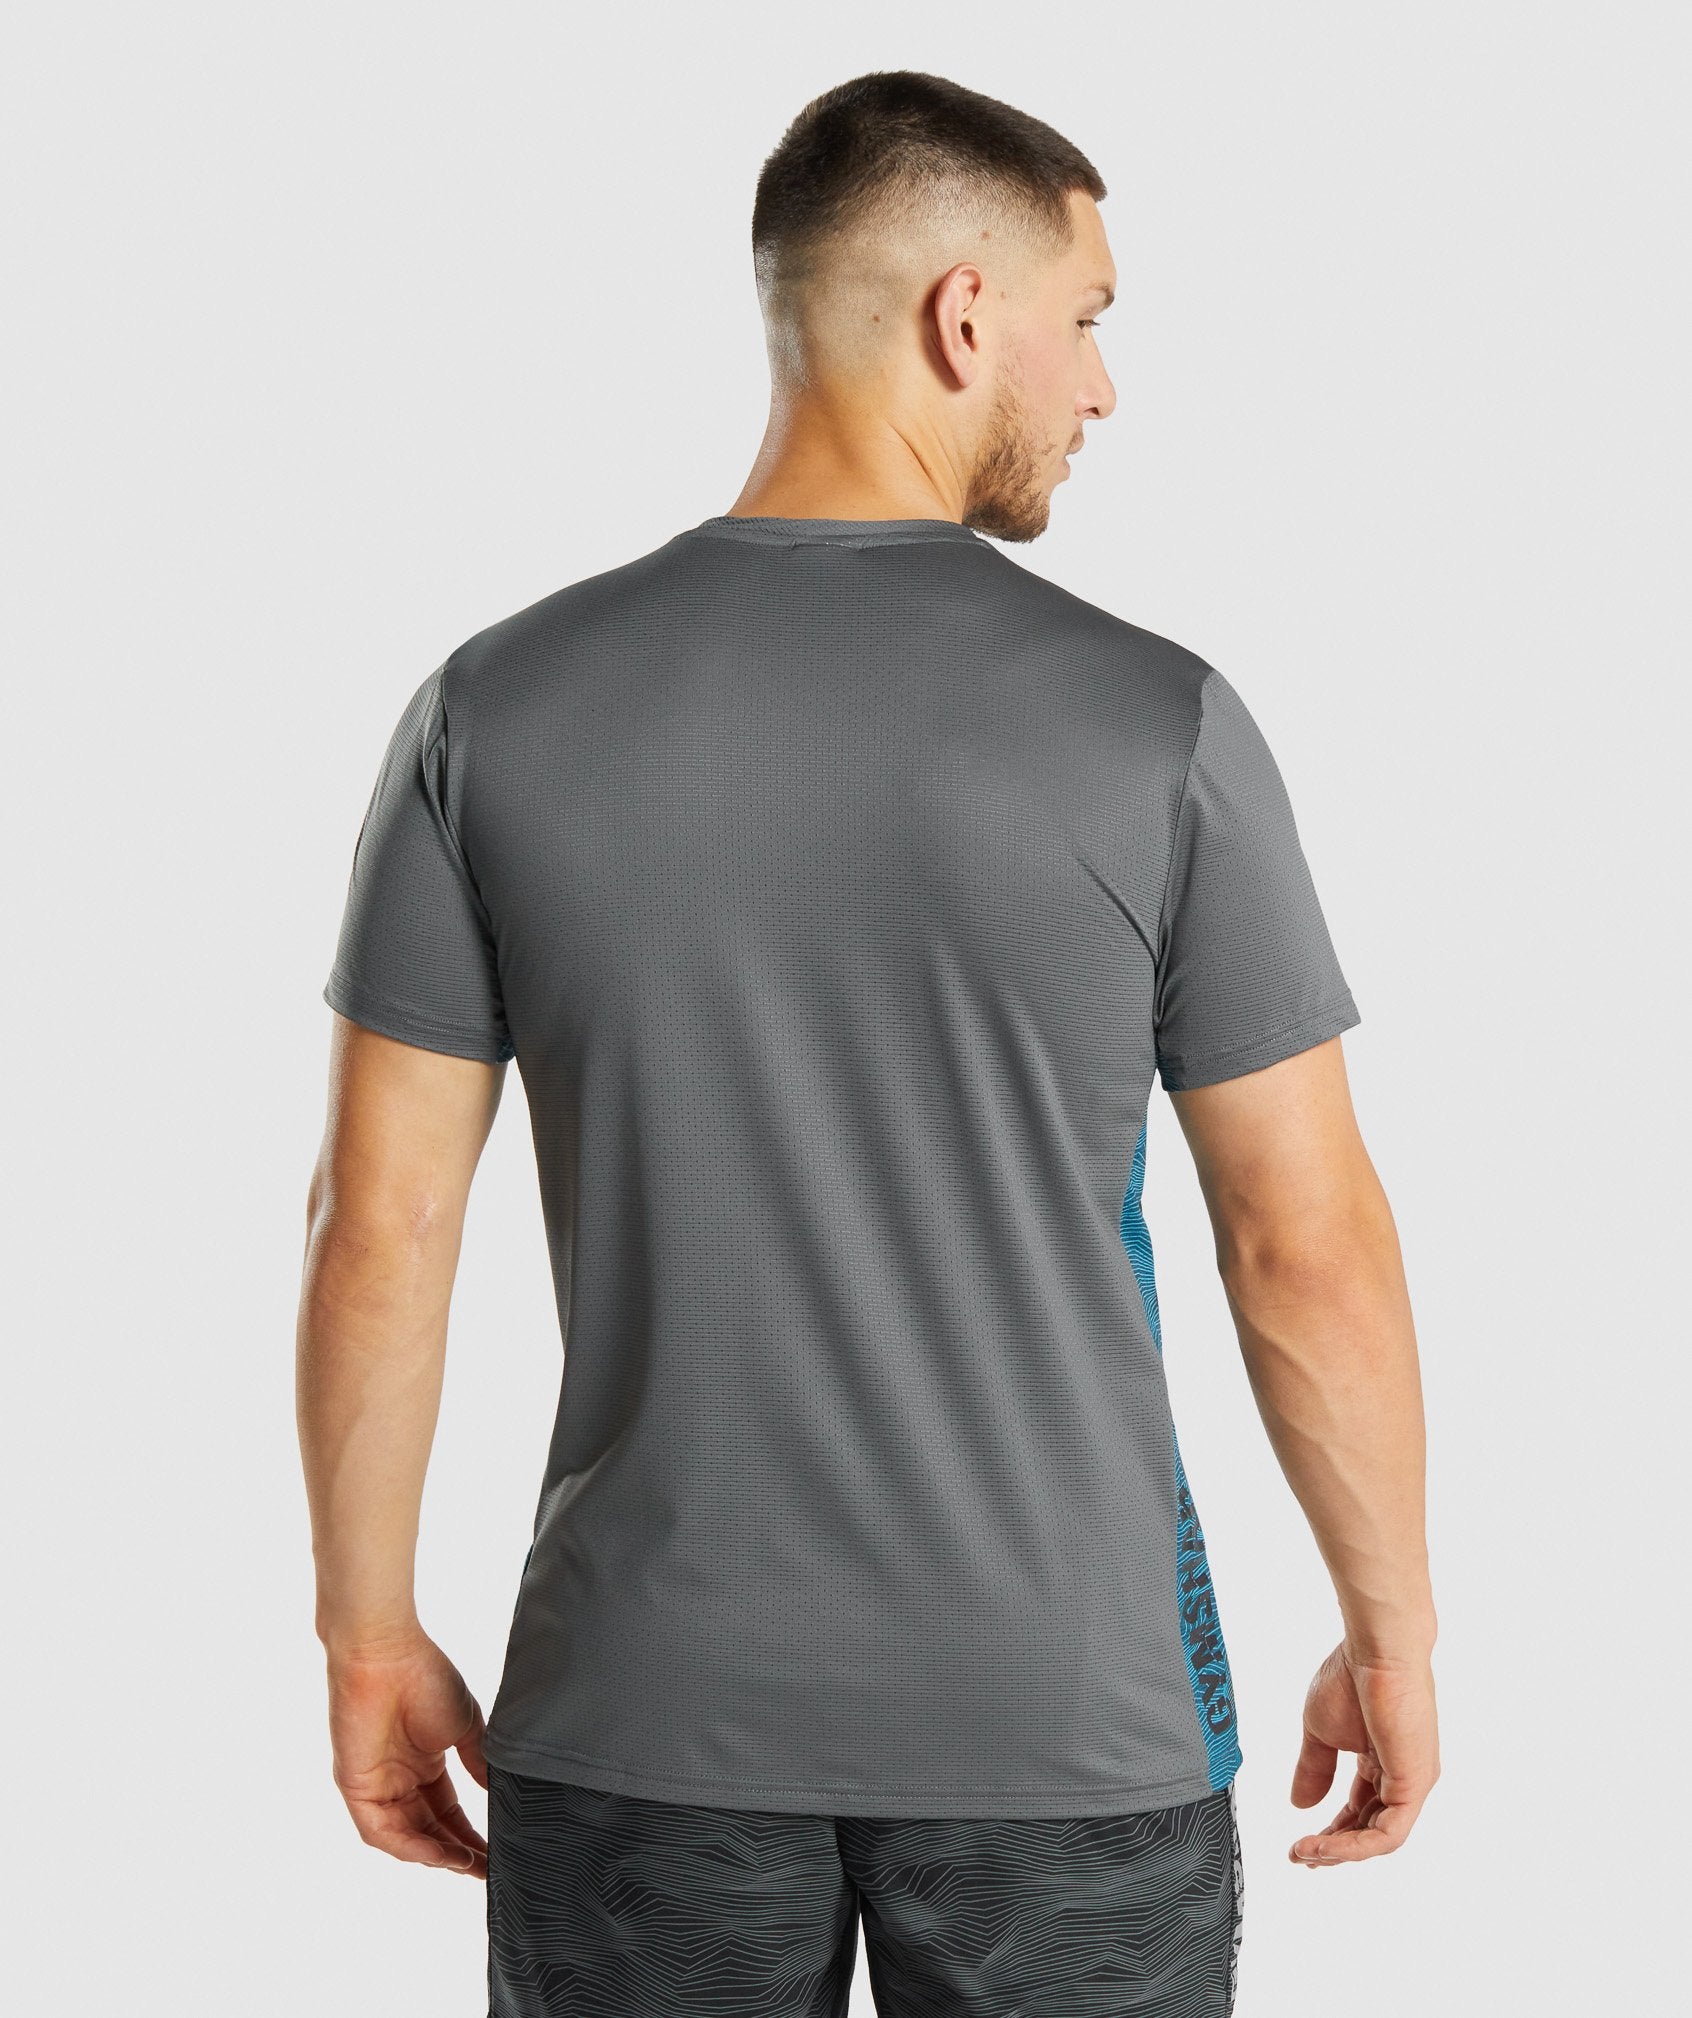 Sport T-Shirt in Charcoal - view 2